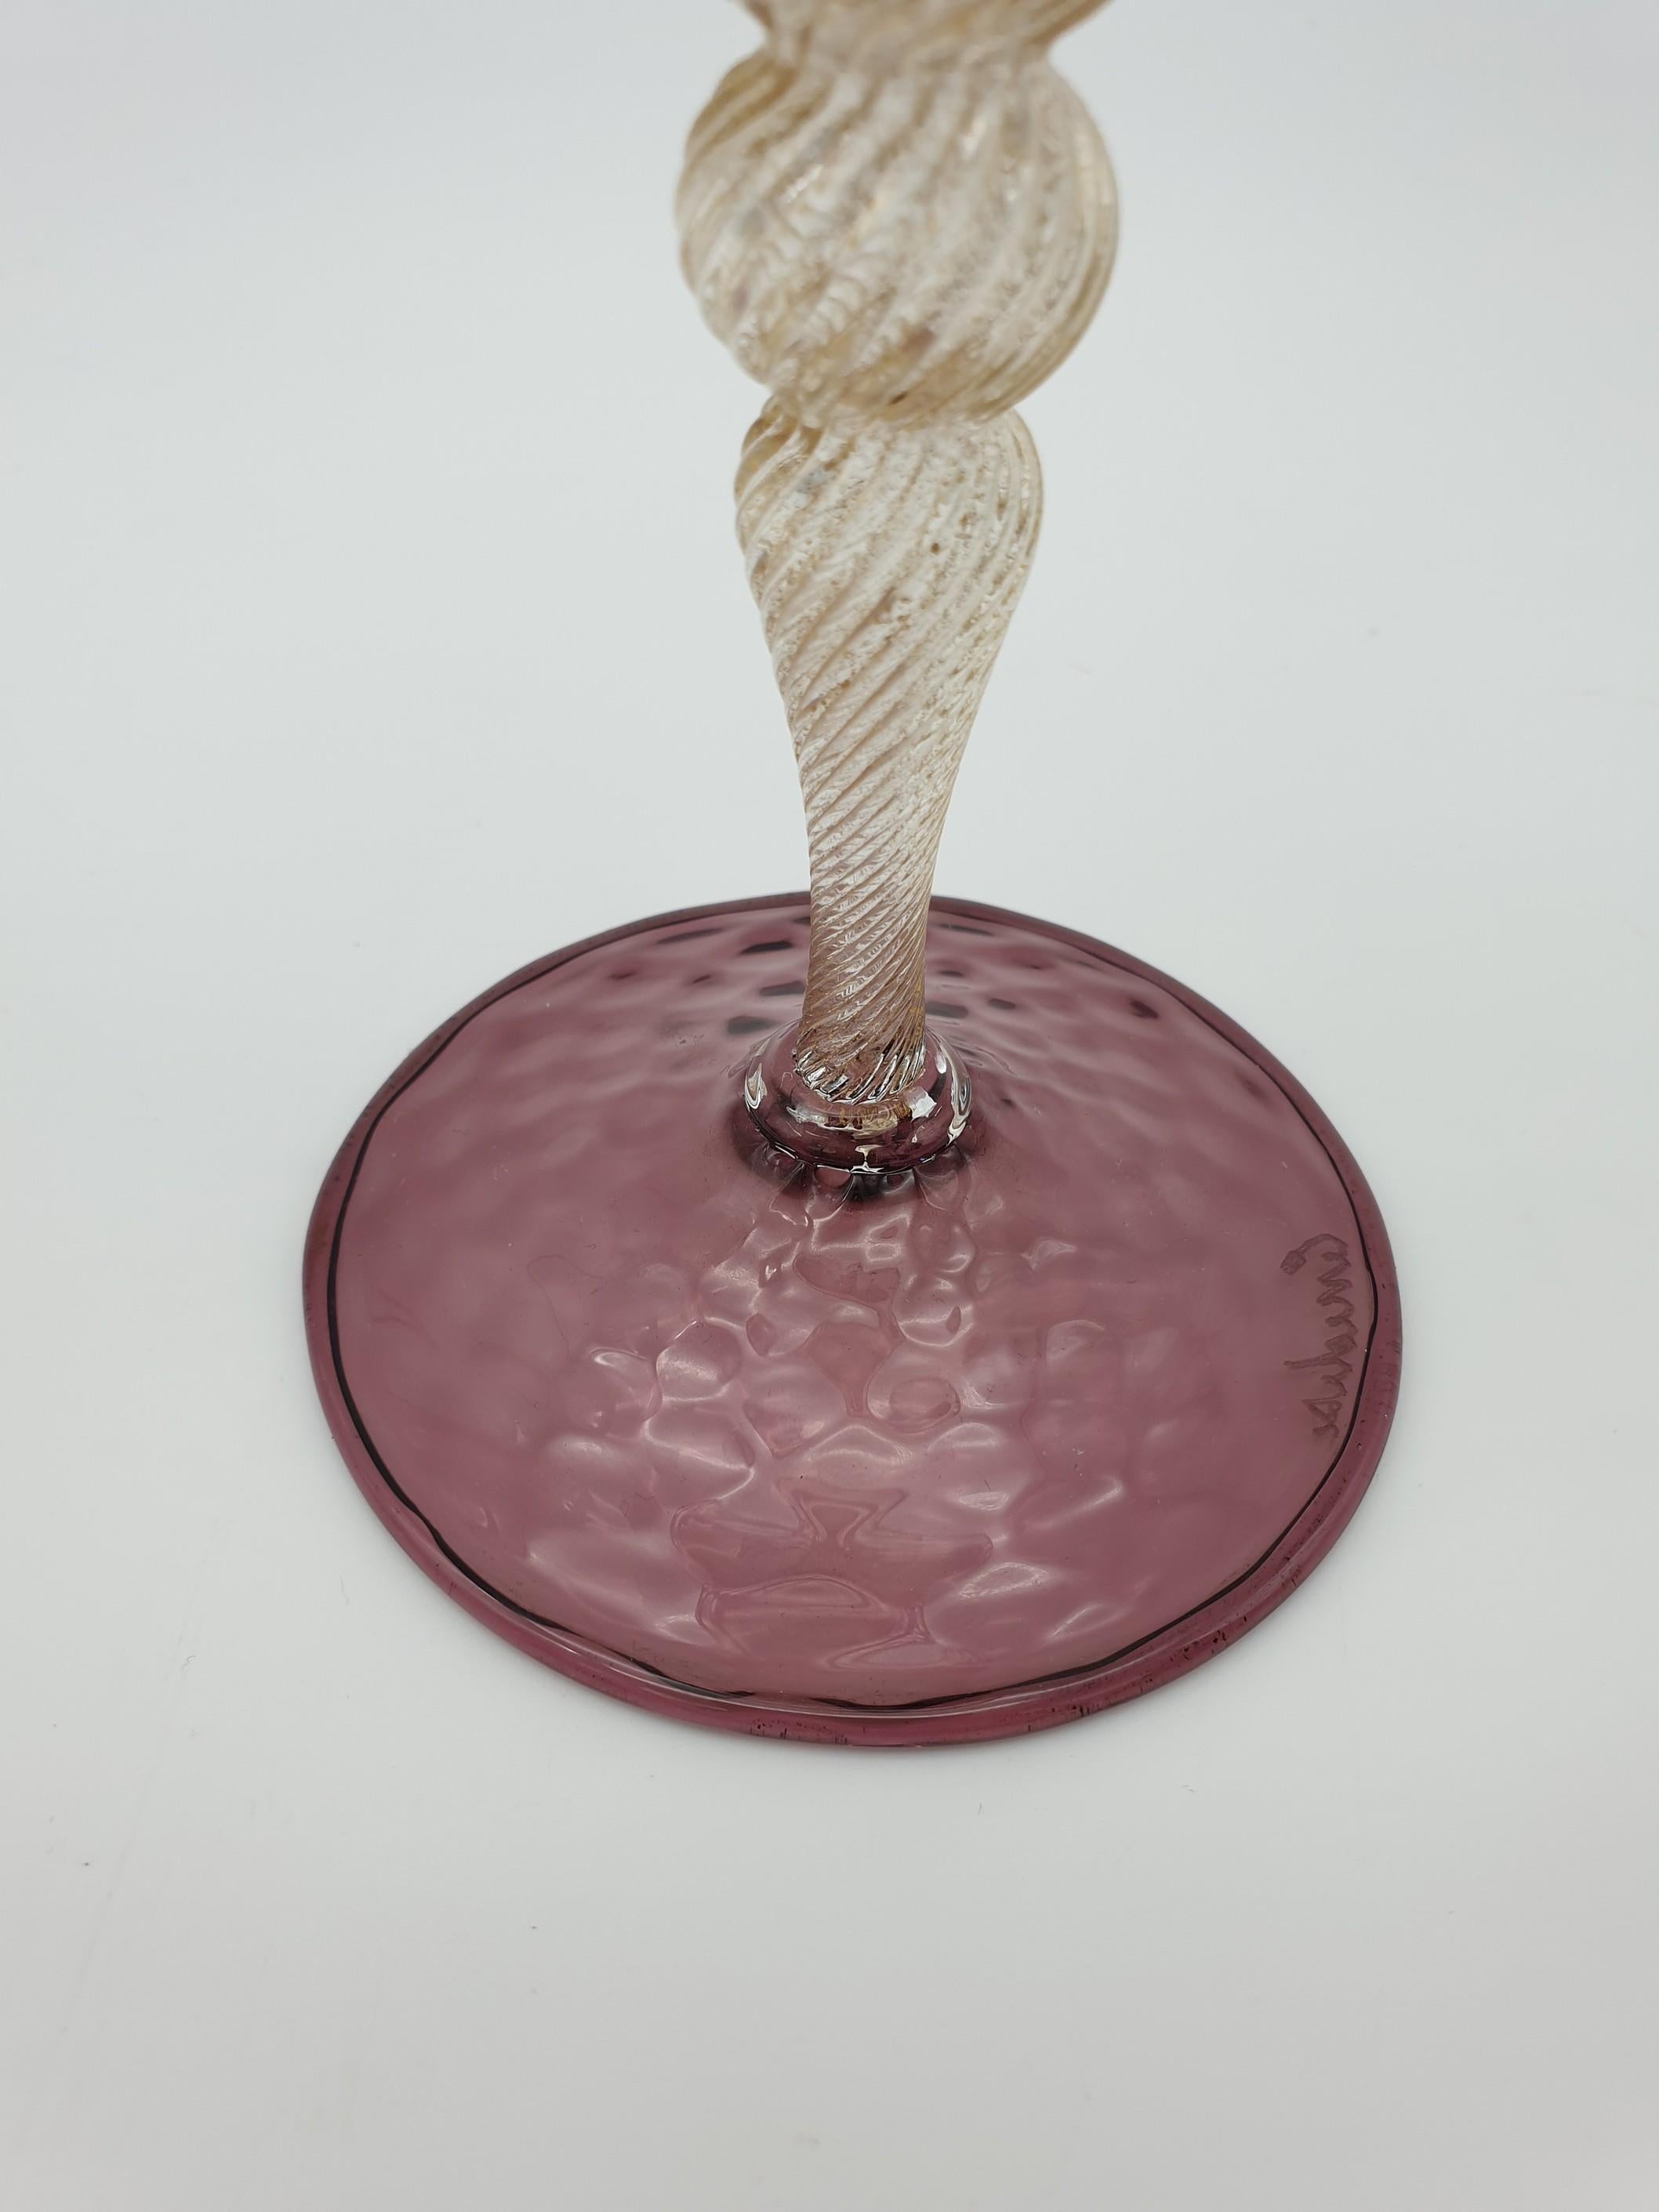 Pair of Modern Murano Glass Goblets by Gino Cenedese, Red & Amethyst, Late 1990s For Sale 6